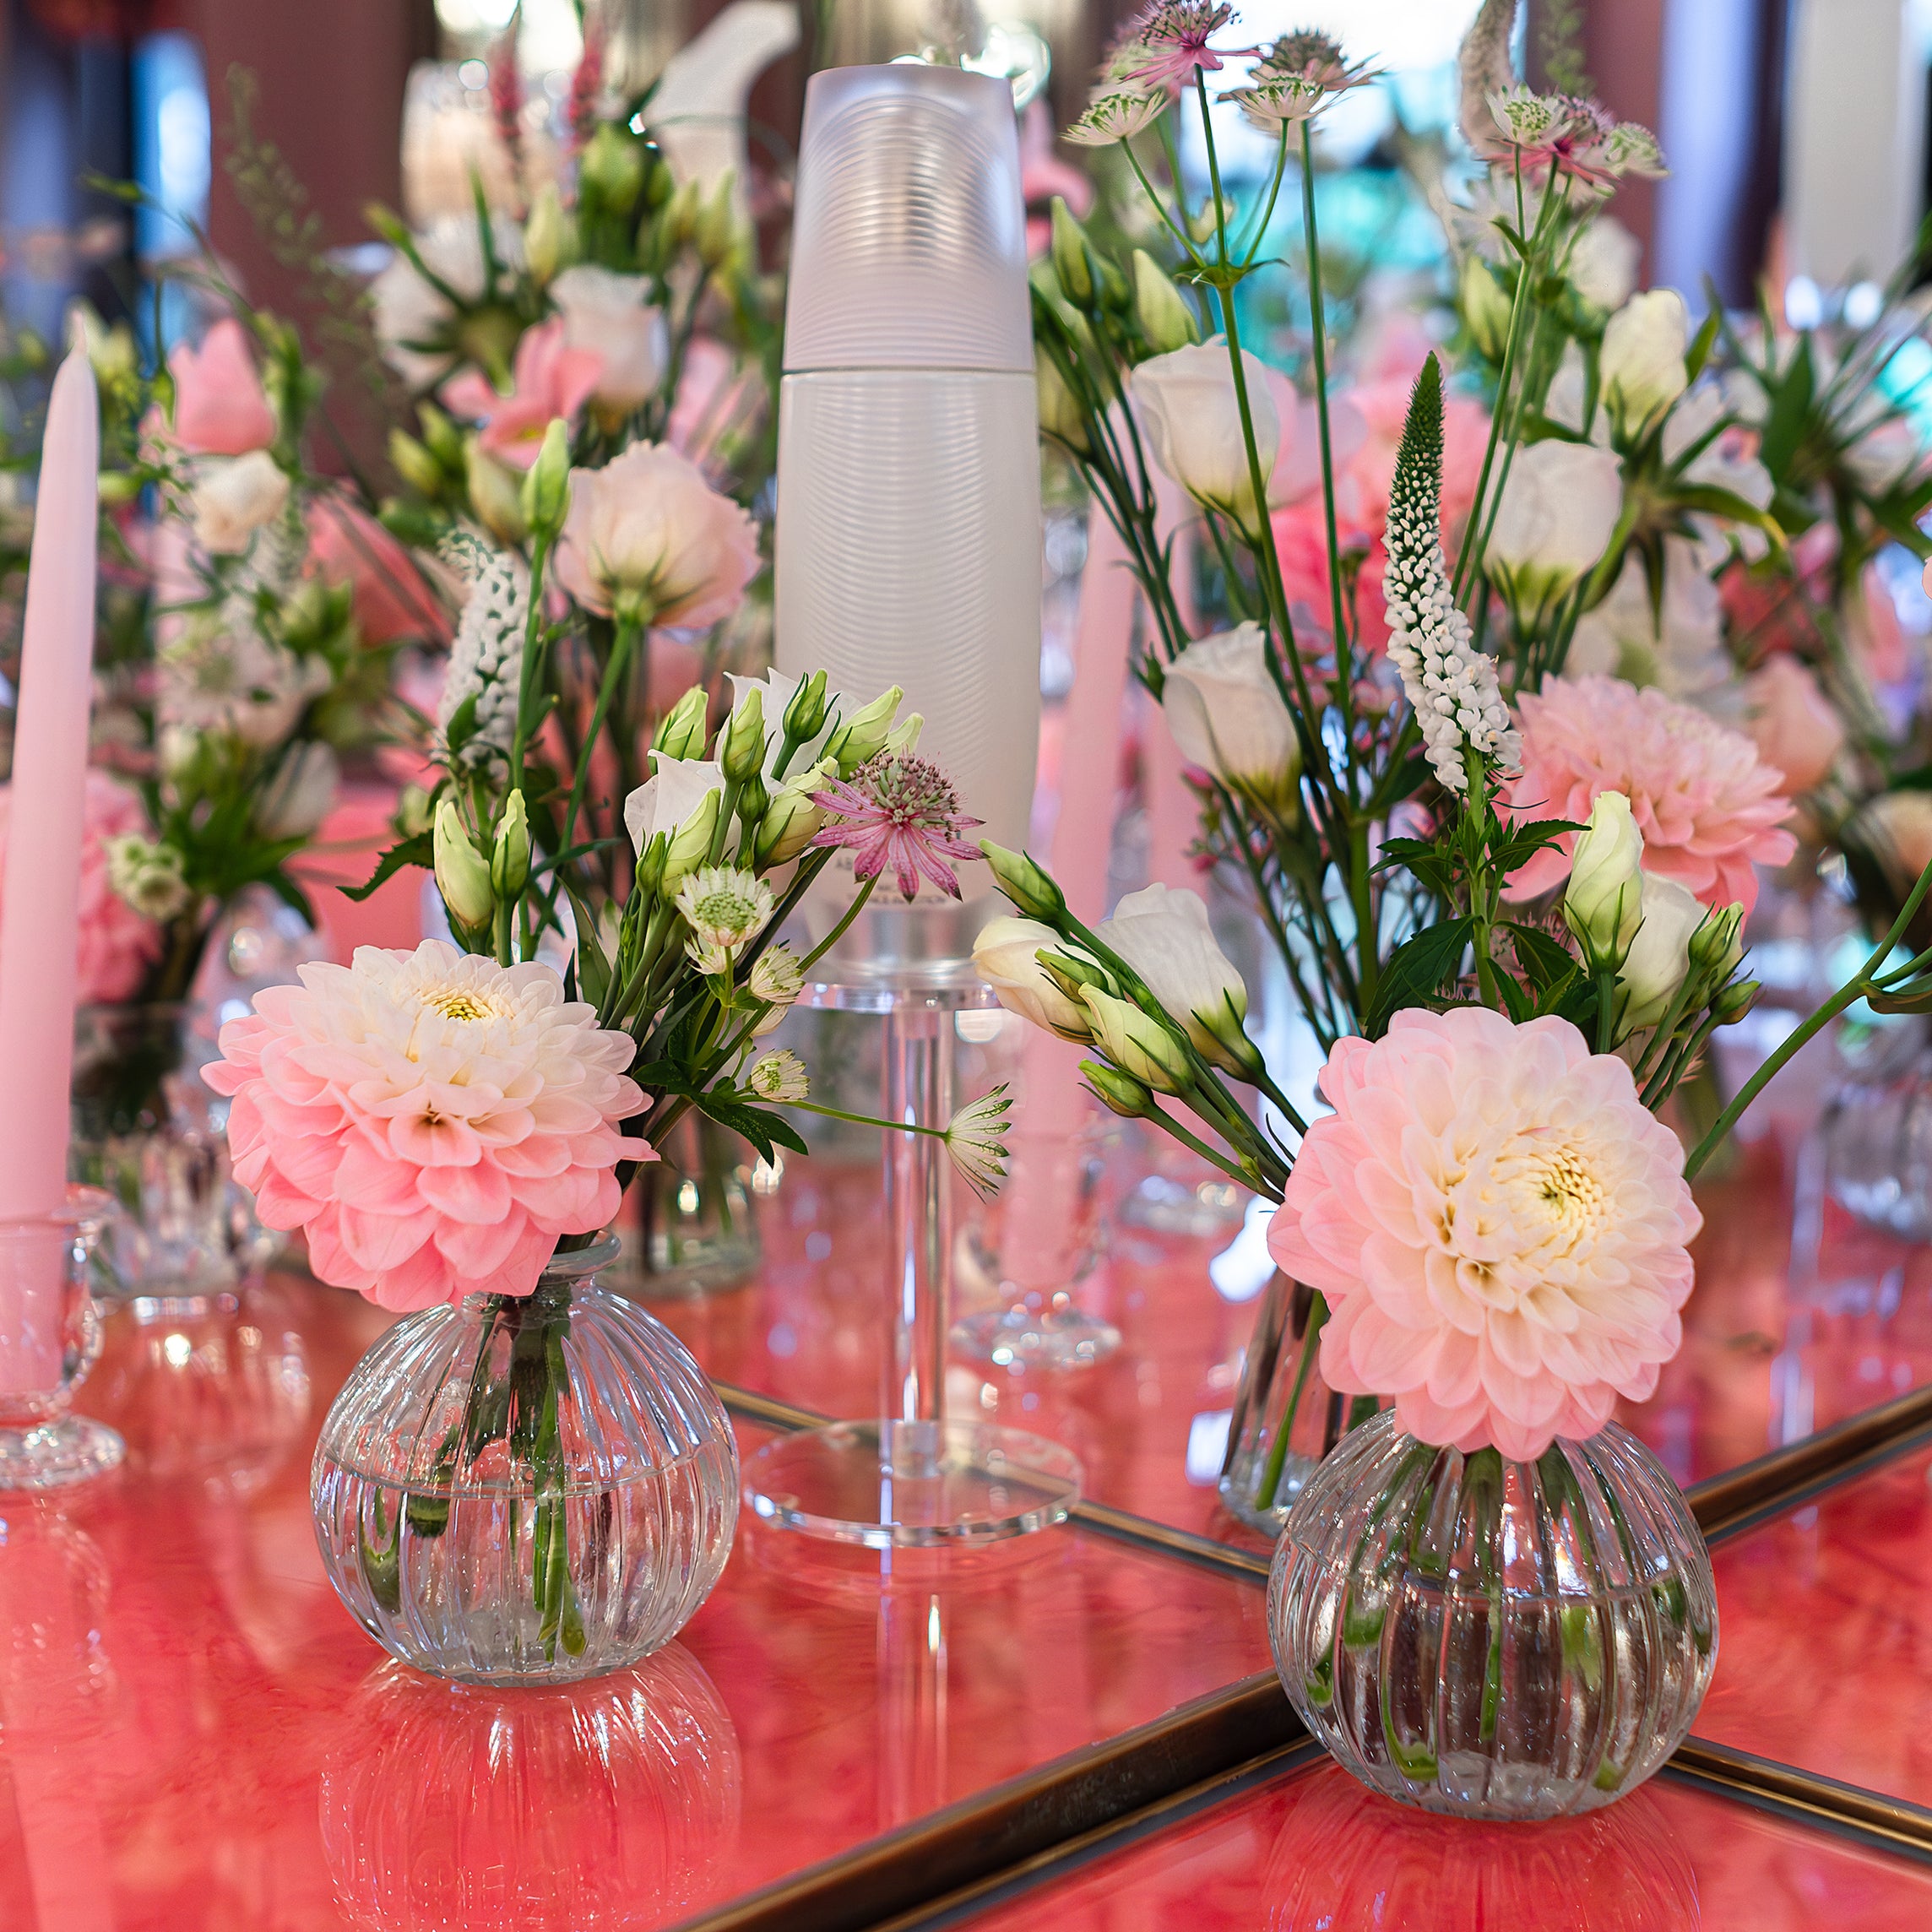 Delicate pink and white floral arrangements by Amarante London for the Sensai product launch, displayed in clear glass vases on a mirrored surface, enhancing the elegance of he location (Beaverbrook Town House).